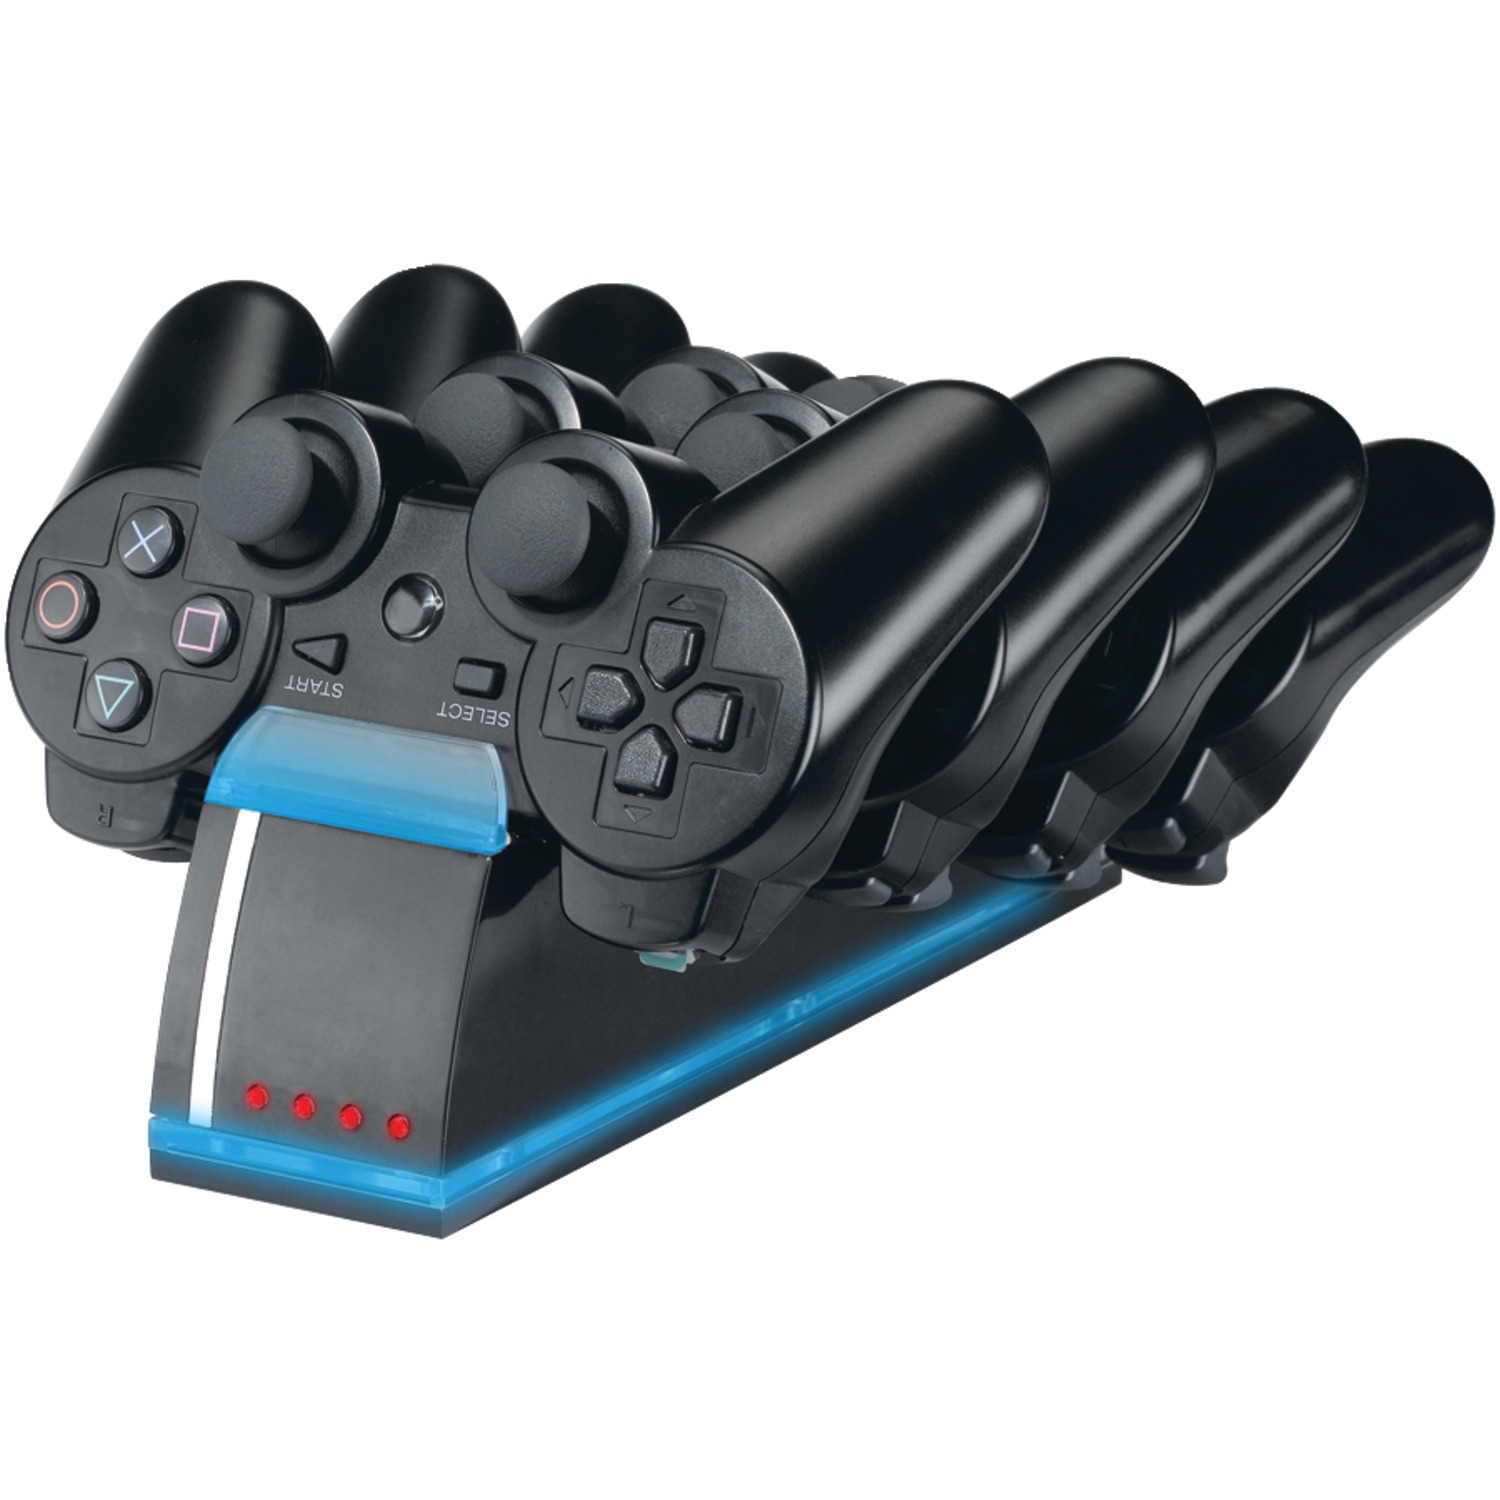 dreamGEAR Quad Dock - Charging stand + AC power adapter - 4 output connectors - black - for Sony DualShock 3; SIXAXIS - image 1 of 5